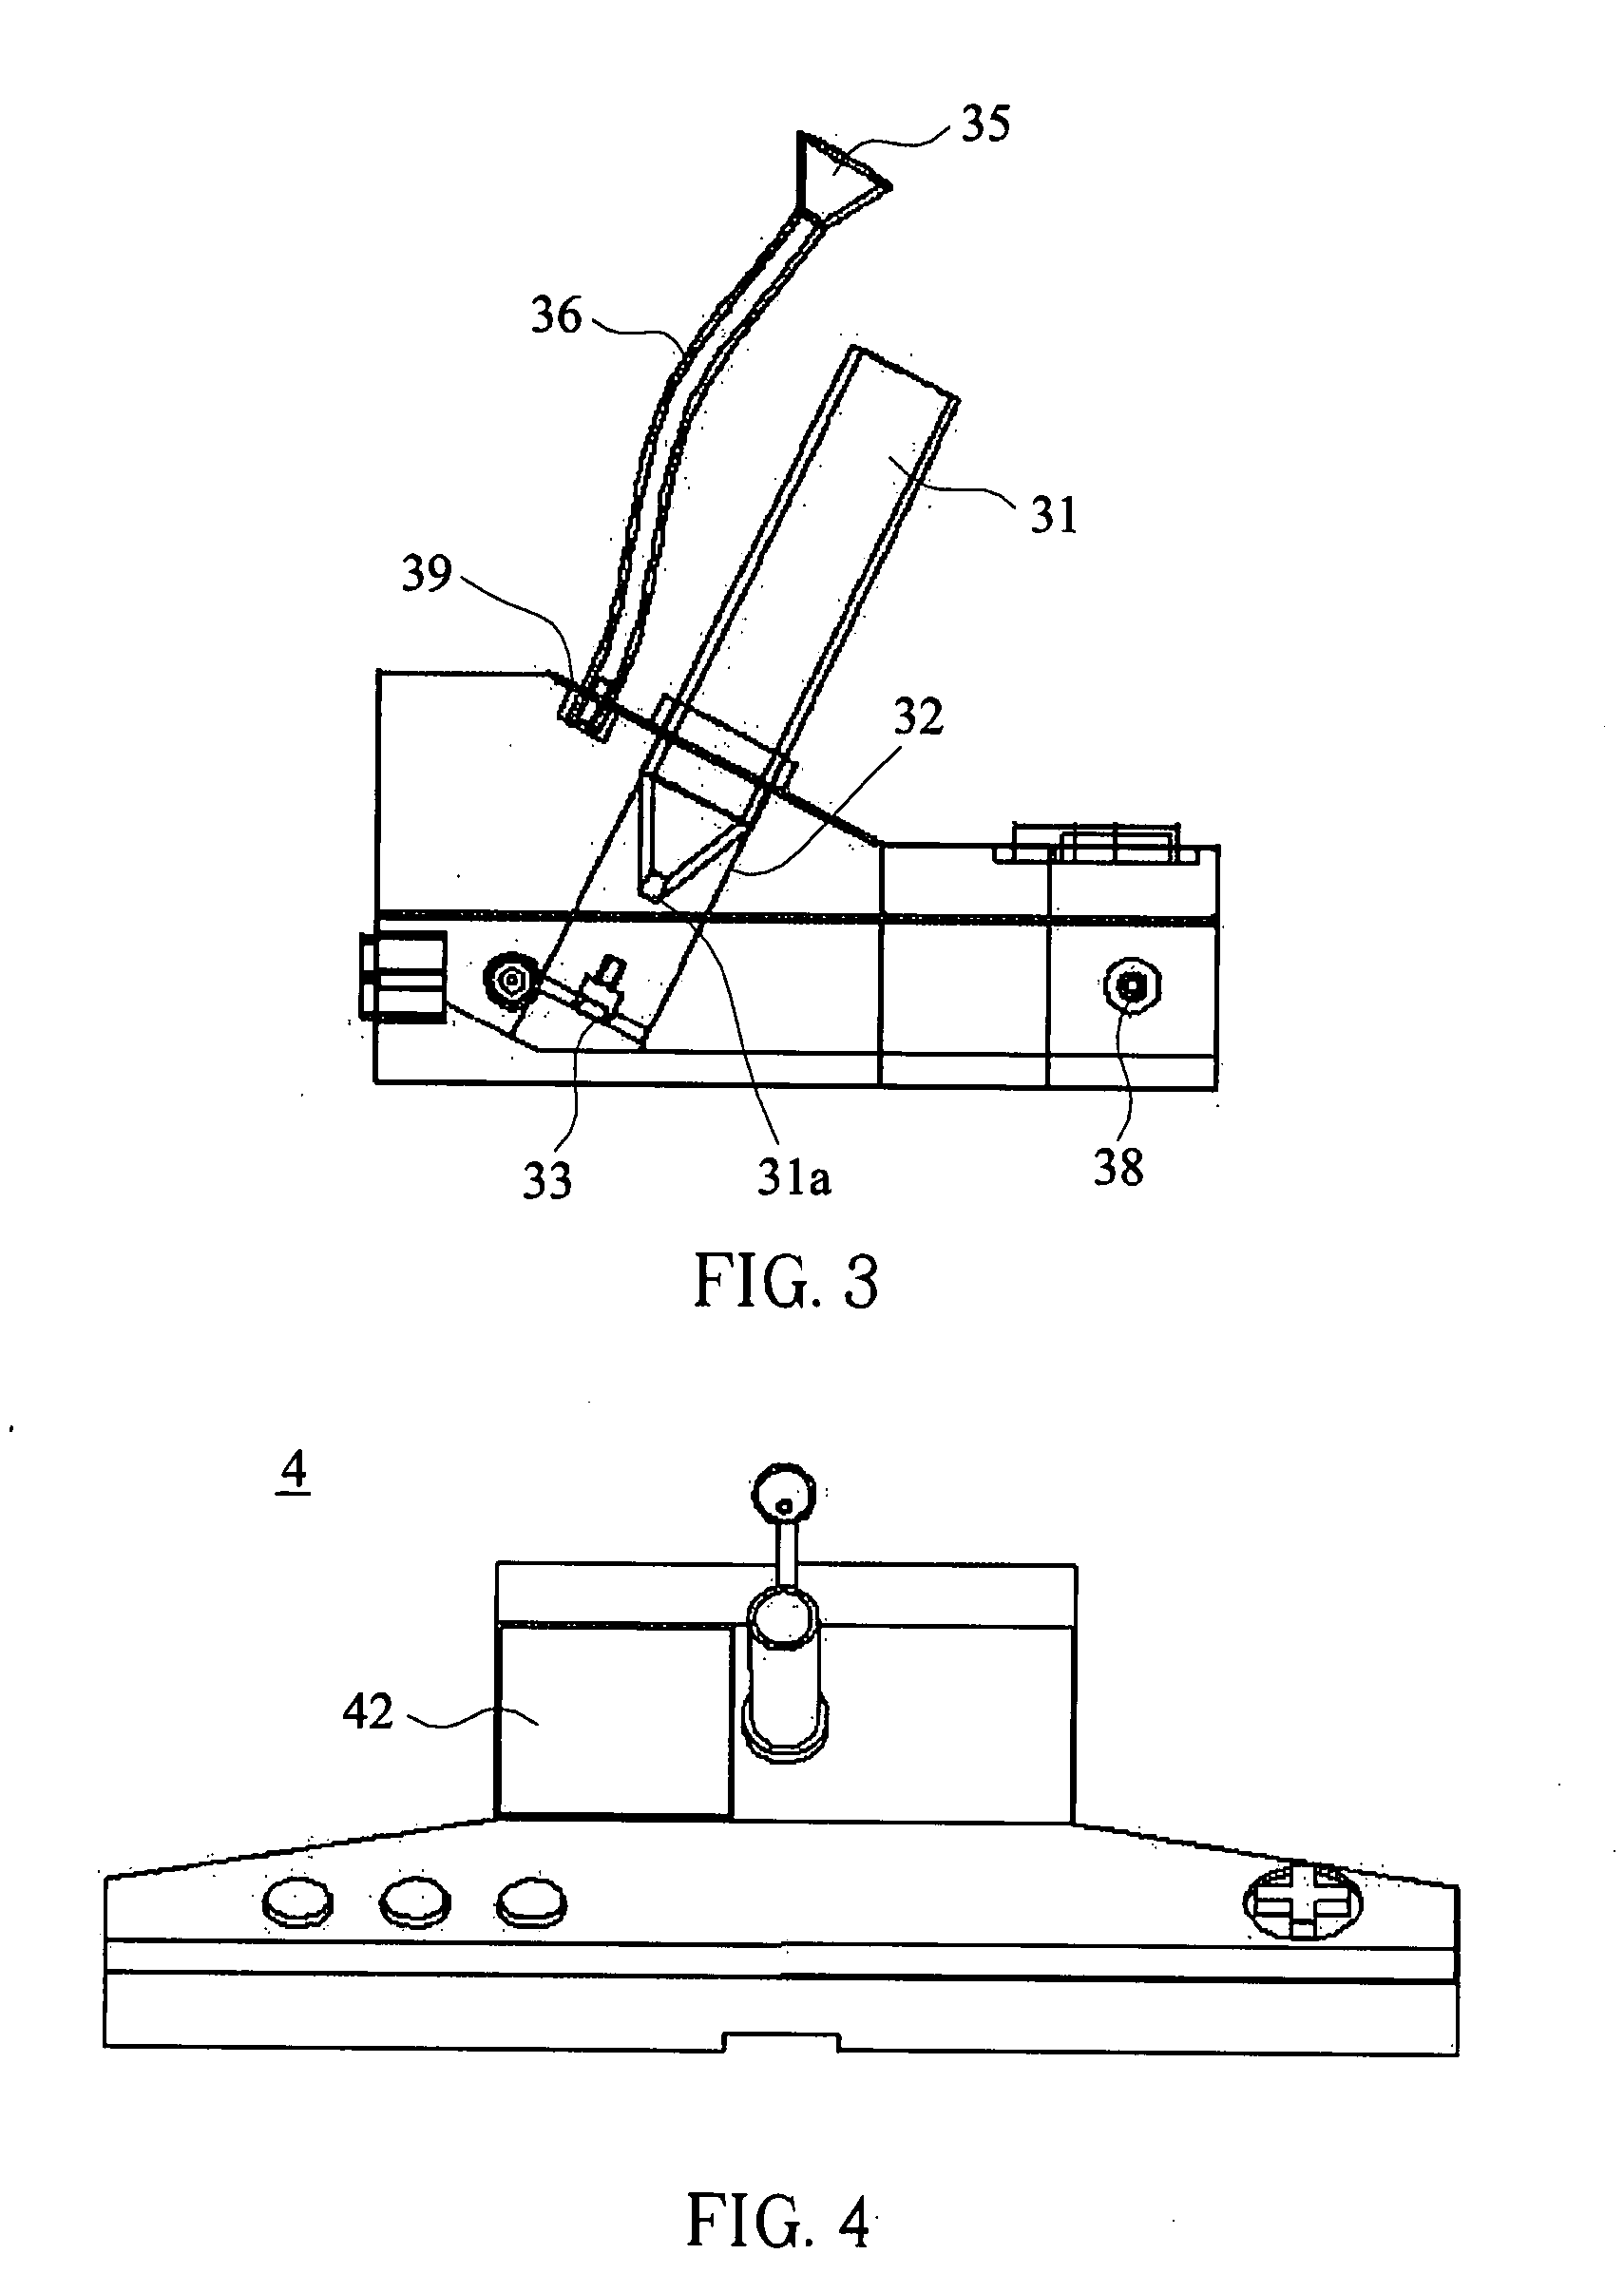 Health care gaming device and method using the same